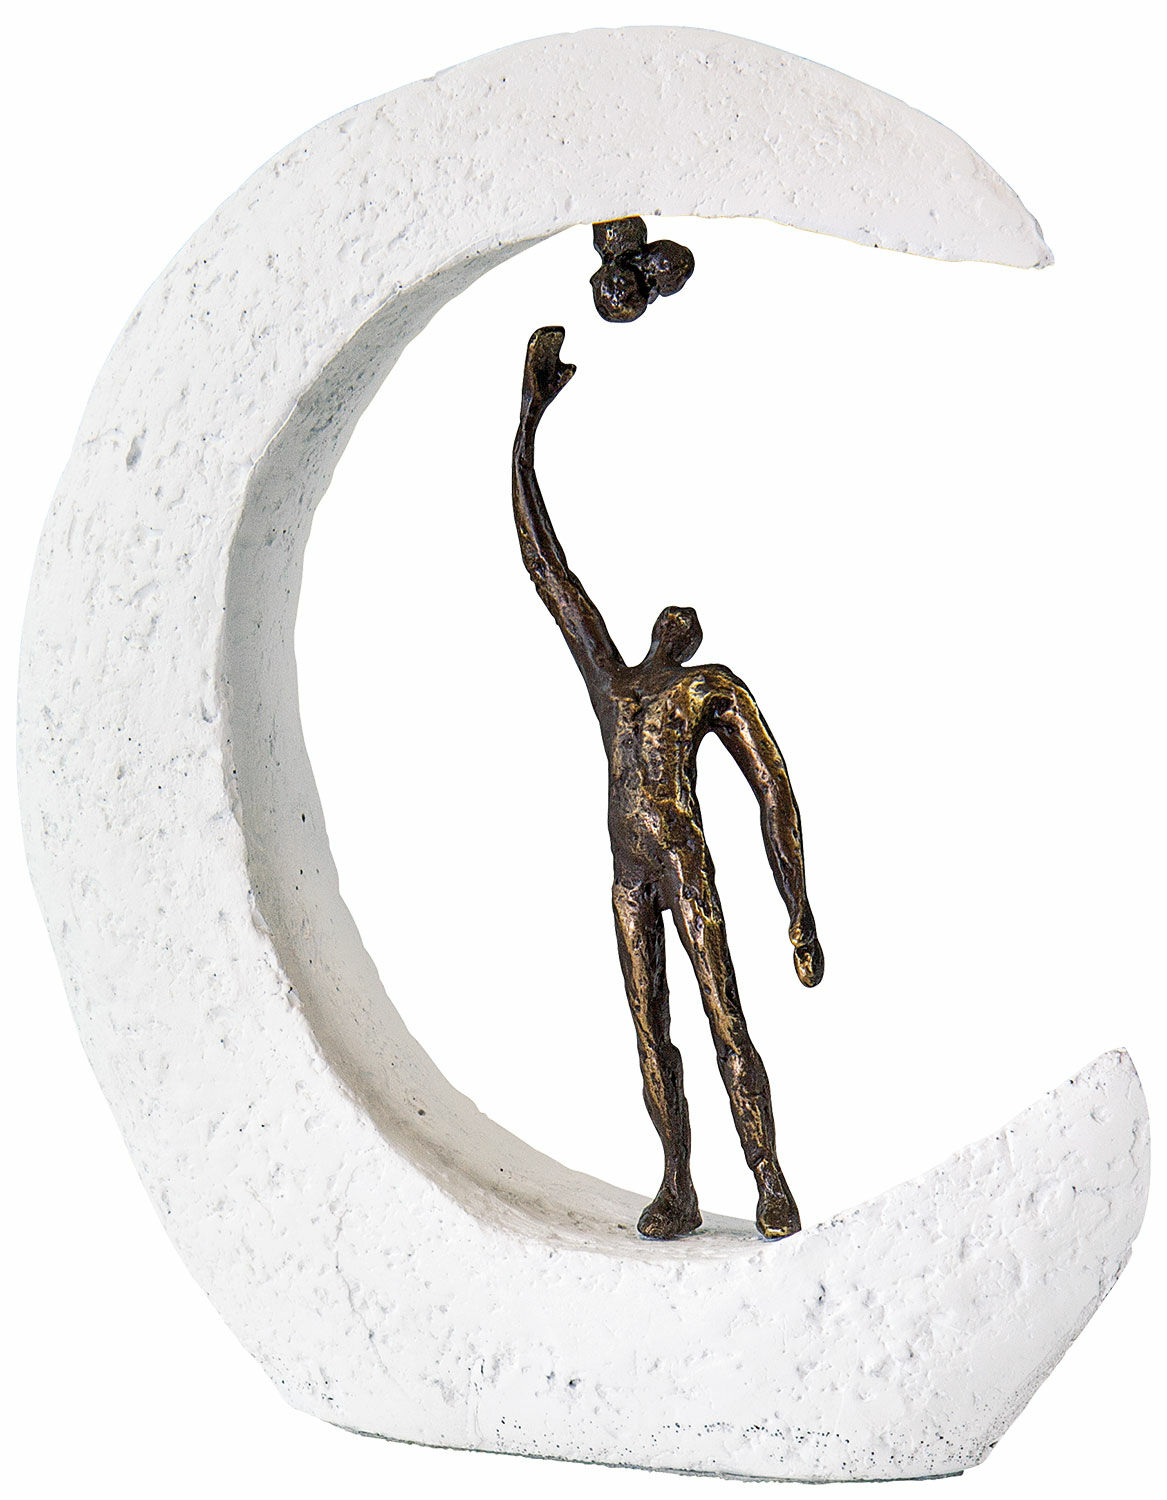 Sculpture "Reaping the Rewards of Success" by Gerard